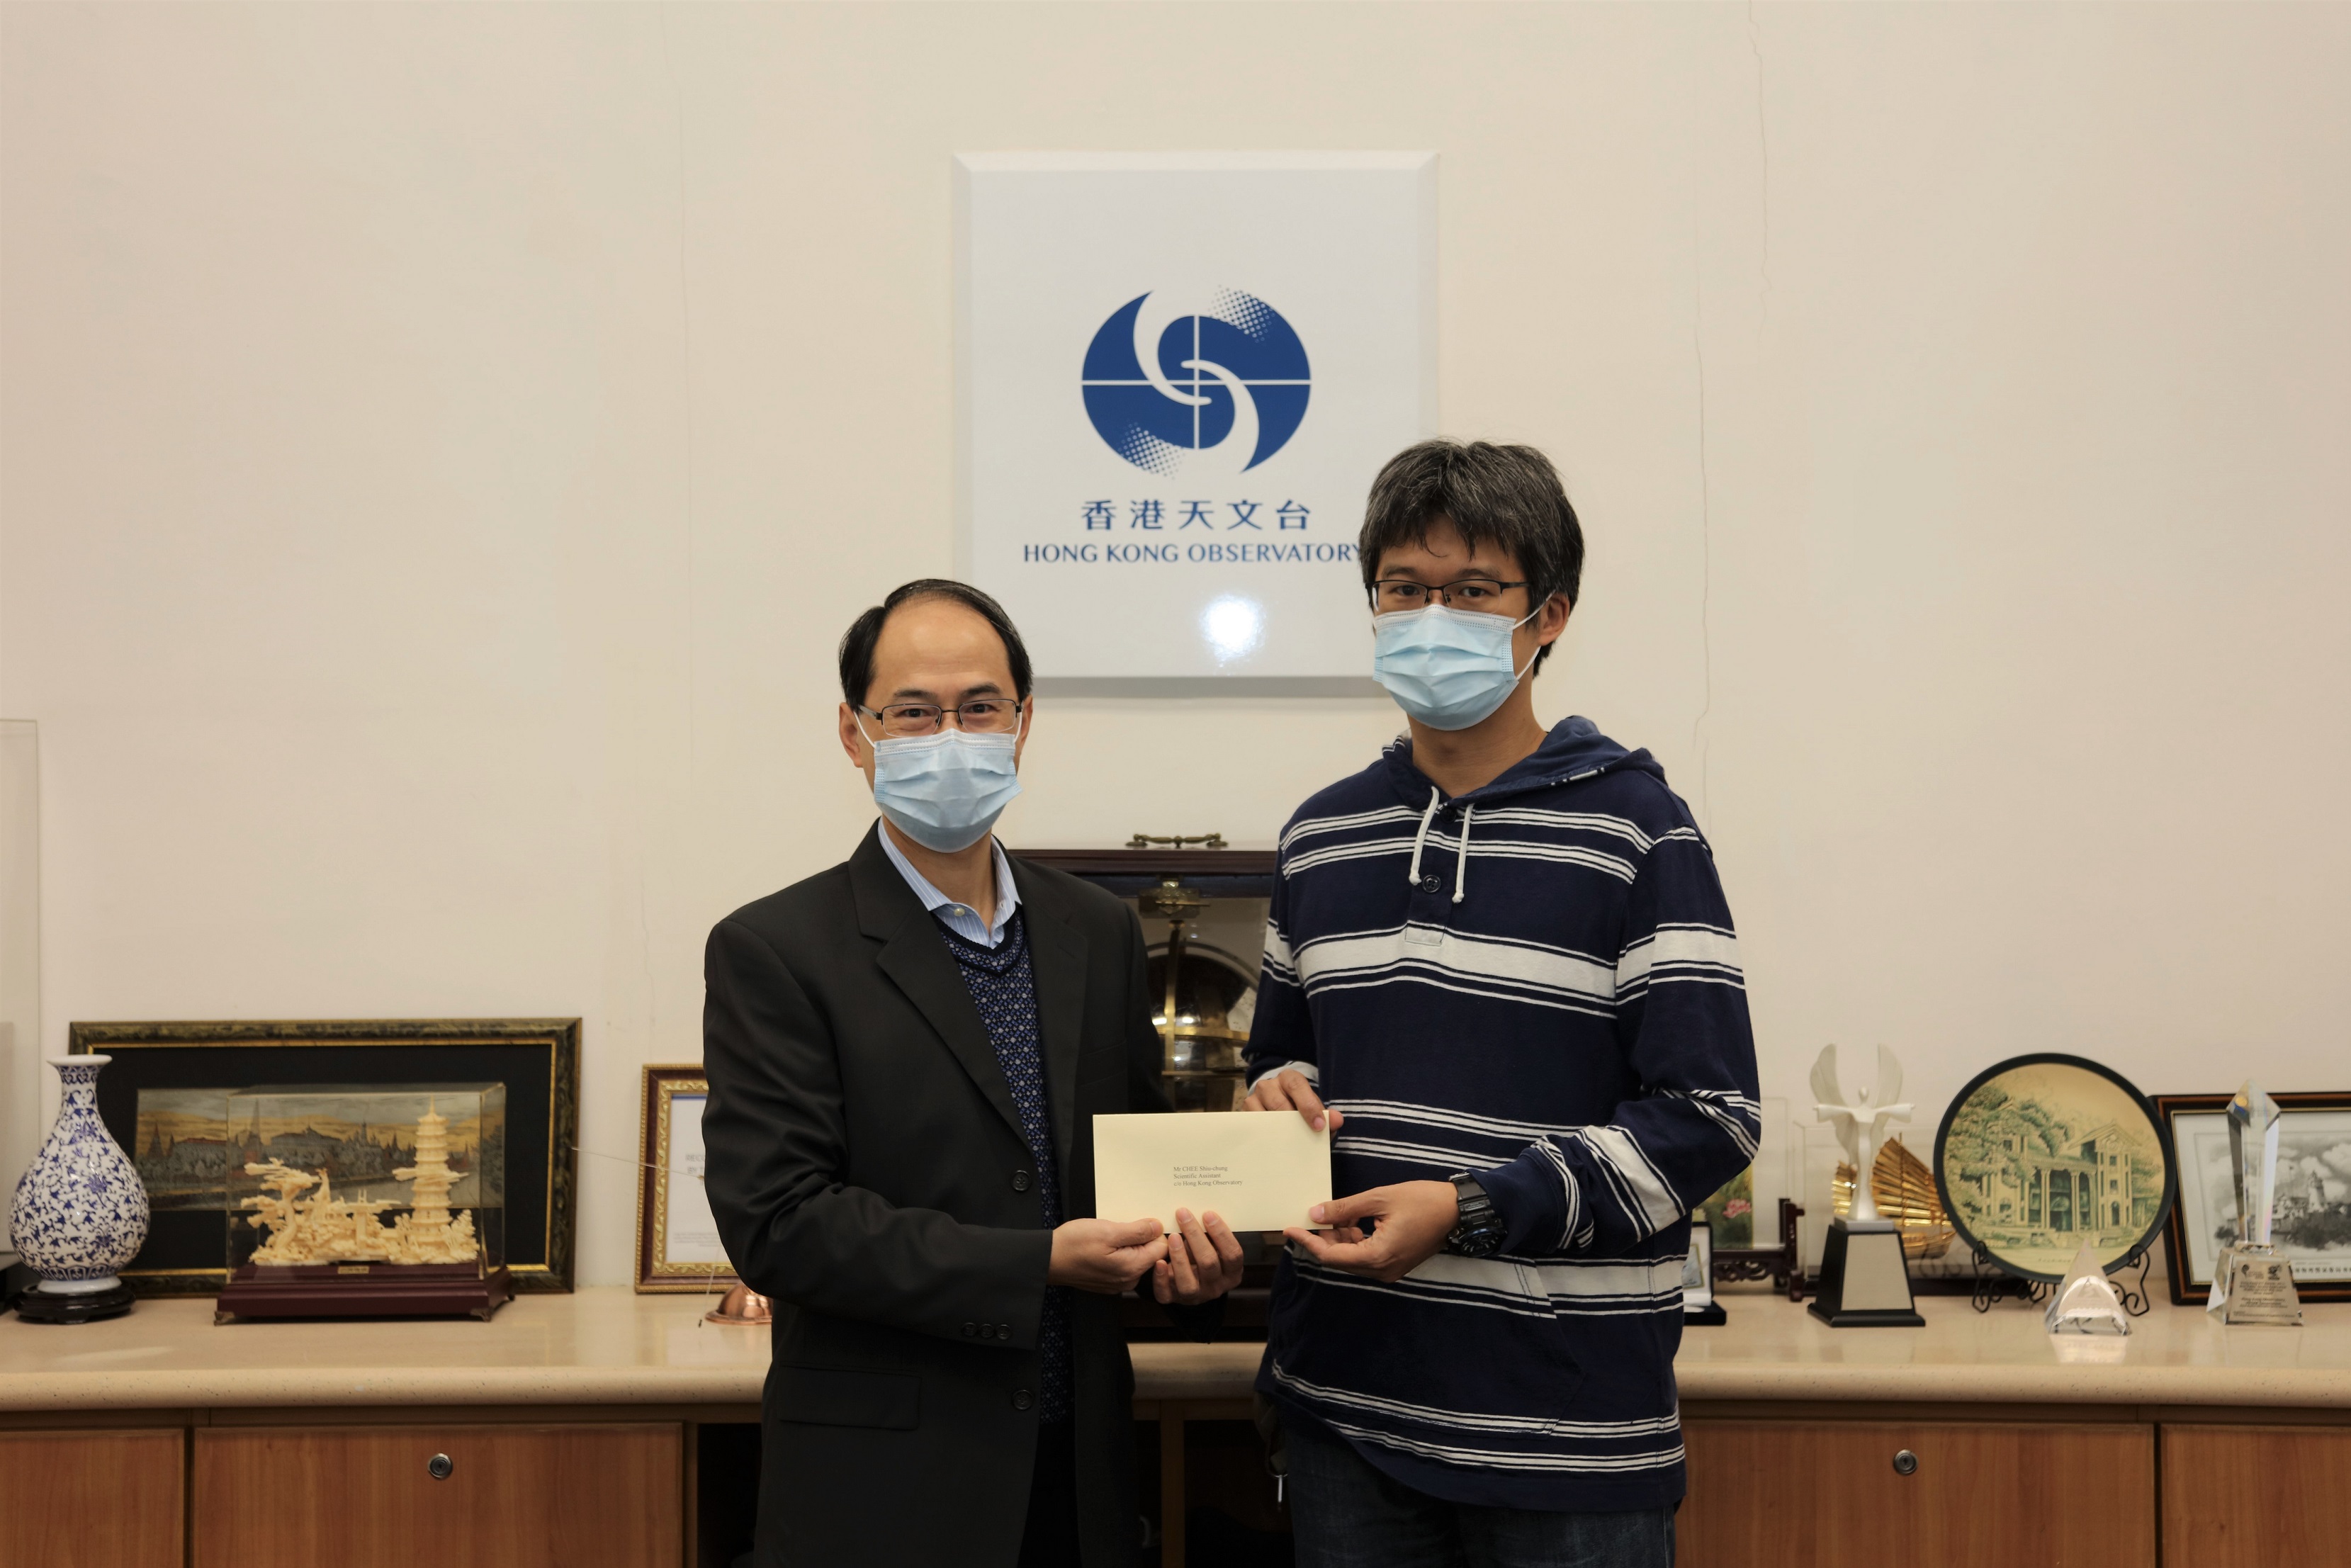 Mr Chee Siu-chung (right) was promoted to Senior Scientific Assistant